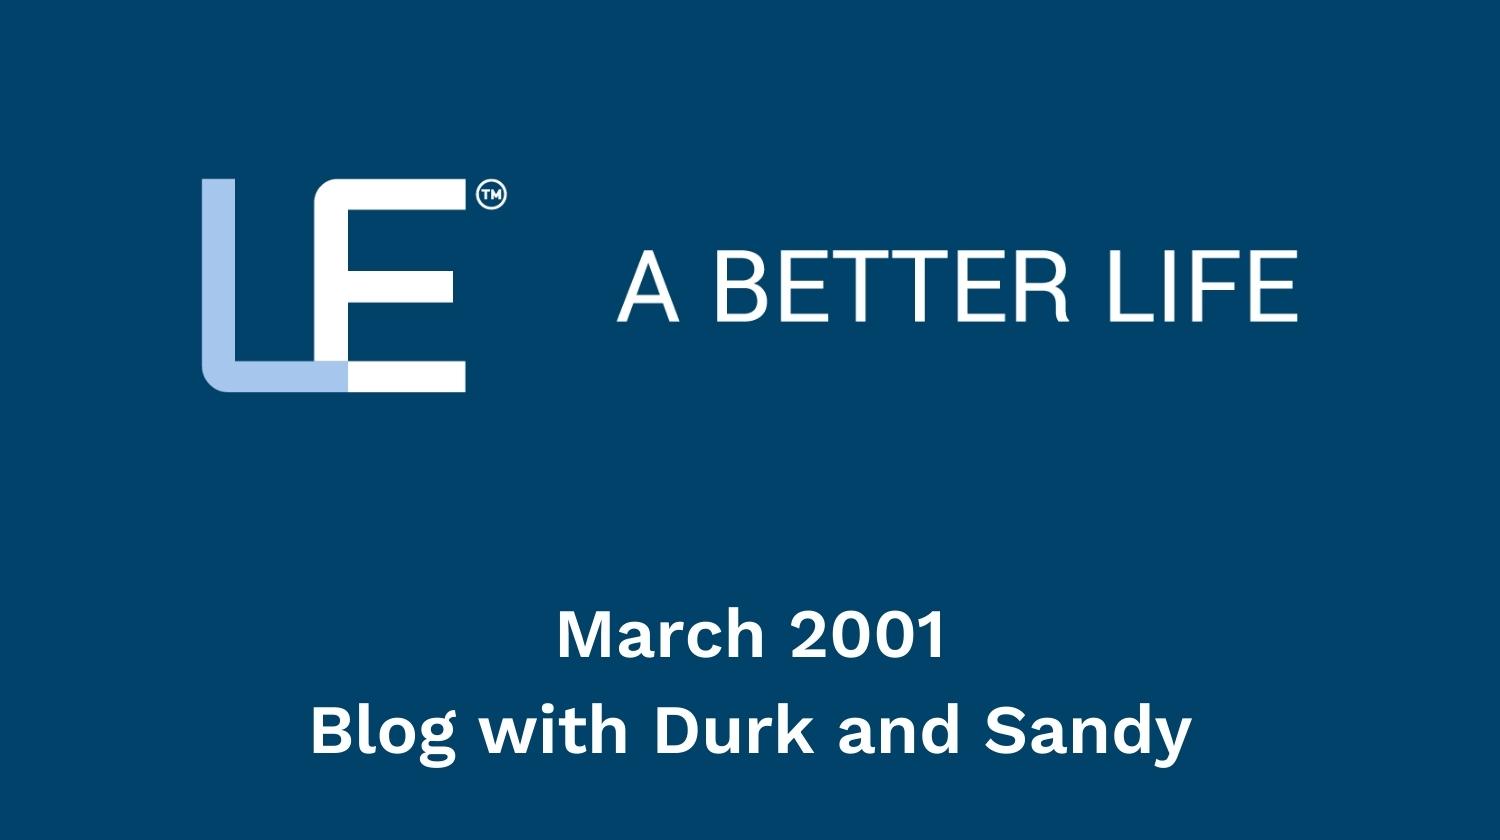 March 2001 Blog with Durk and Sandy